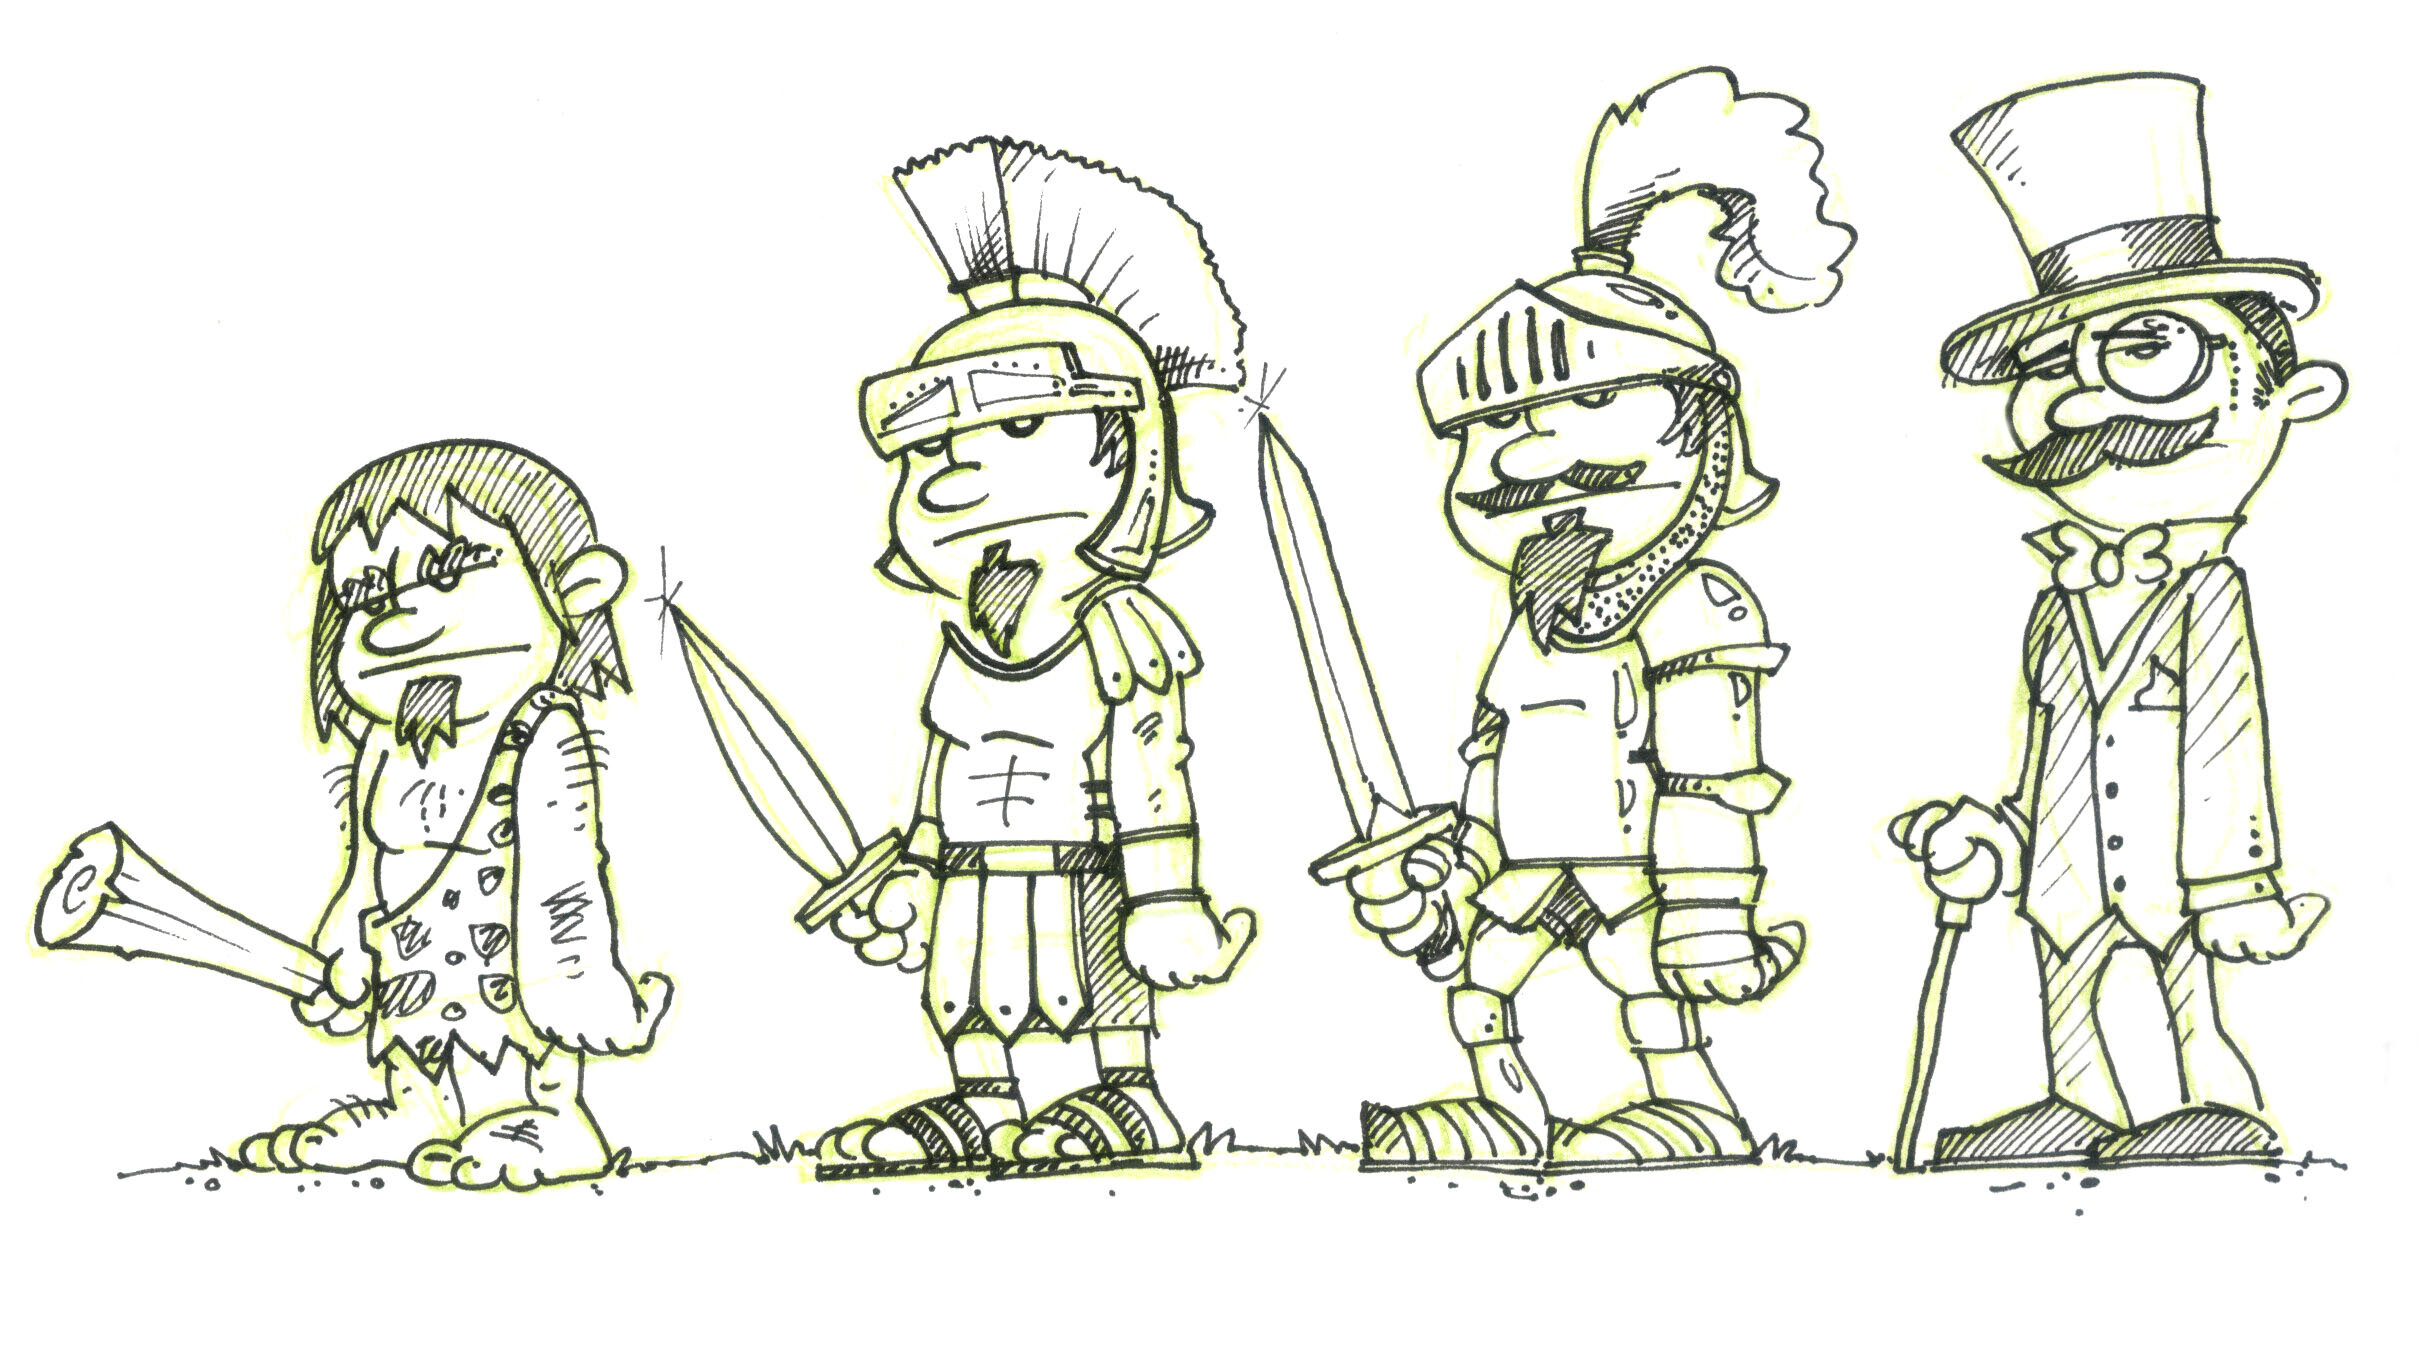 FOUR_AGES_SKETCH01.jpg